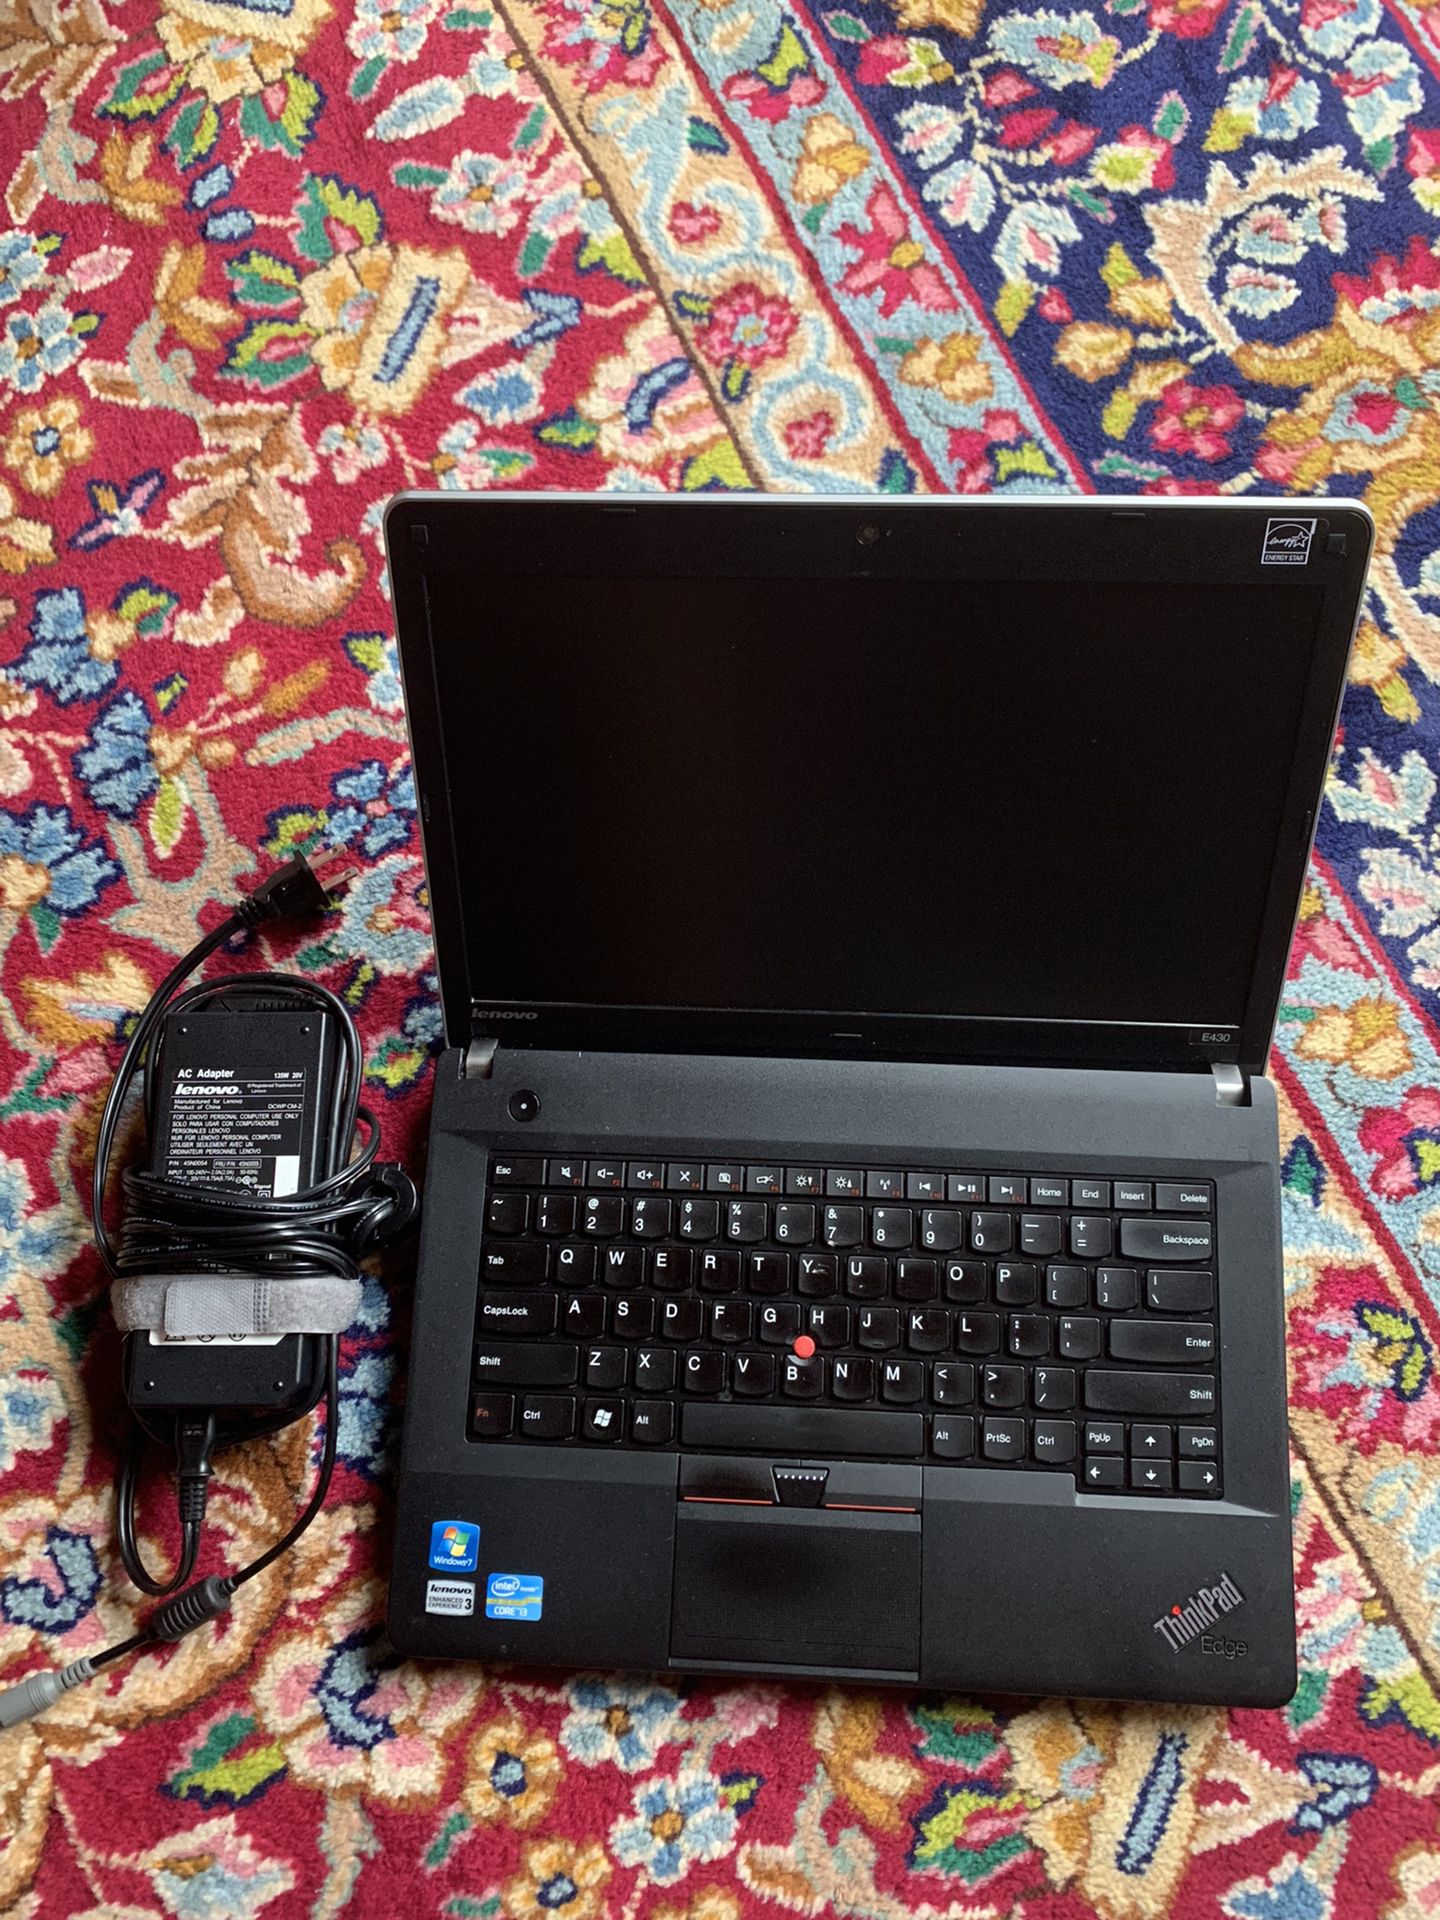 Working Lenovo ThinkPad Laptop and Adapter